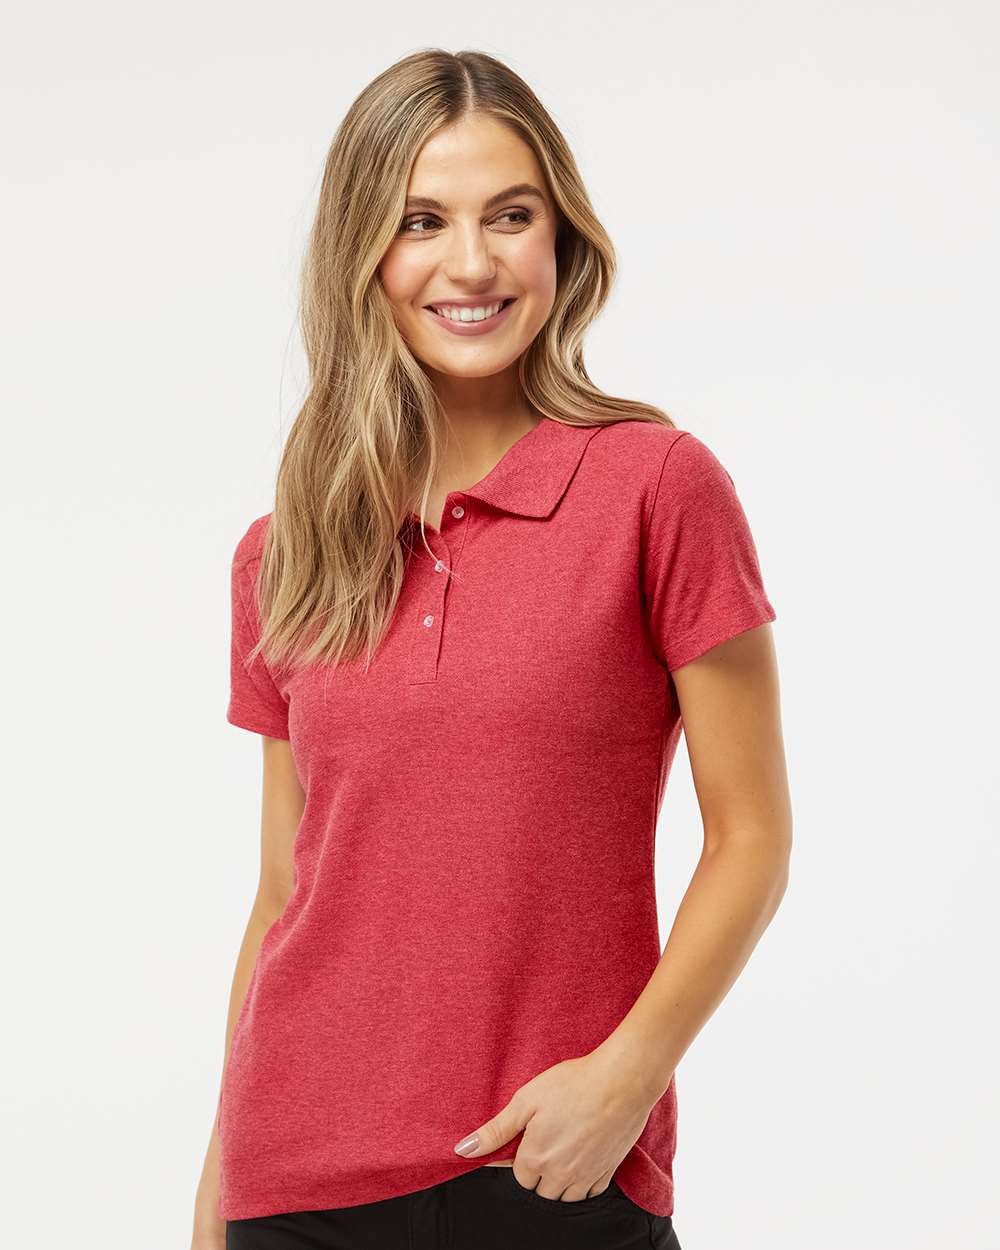 M&O Women’s Soft Touch Polo #7007 Red Heather